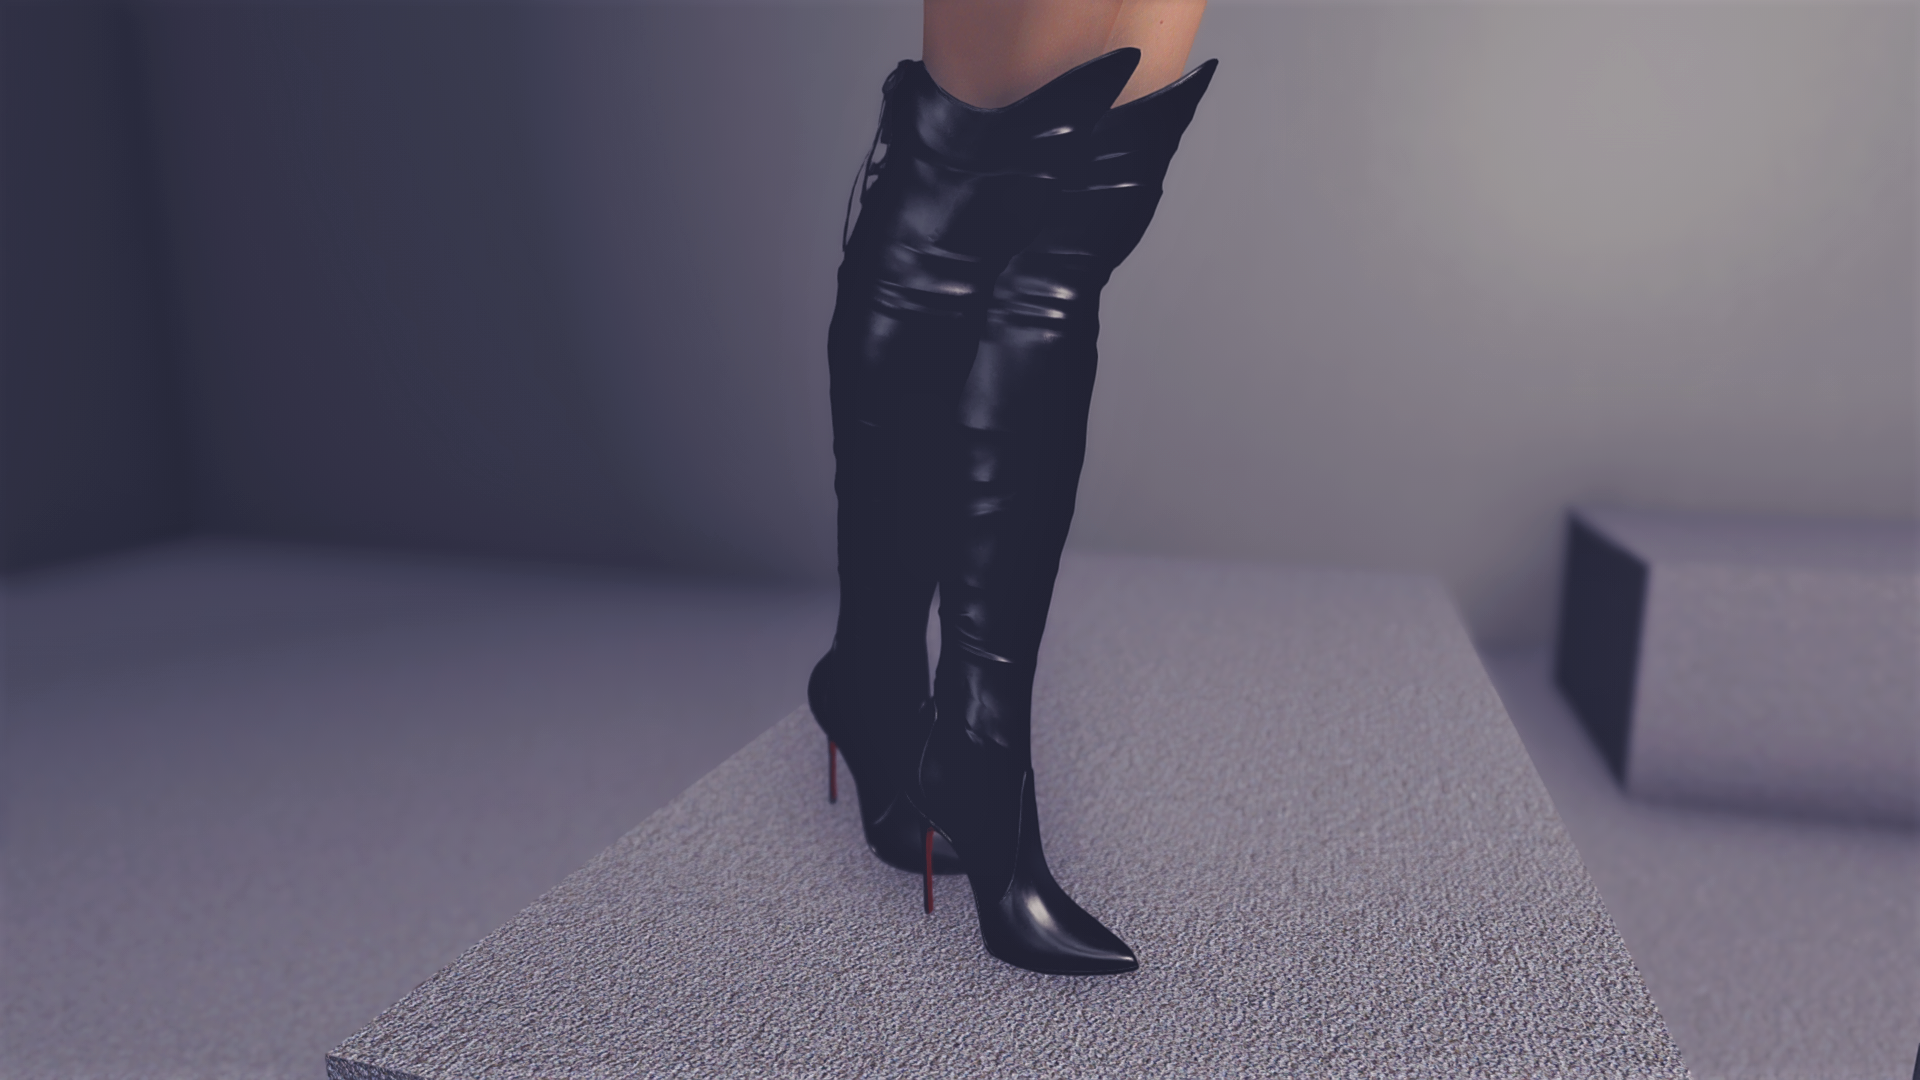 brittney hertel recommends thigh high boots skyrim pic